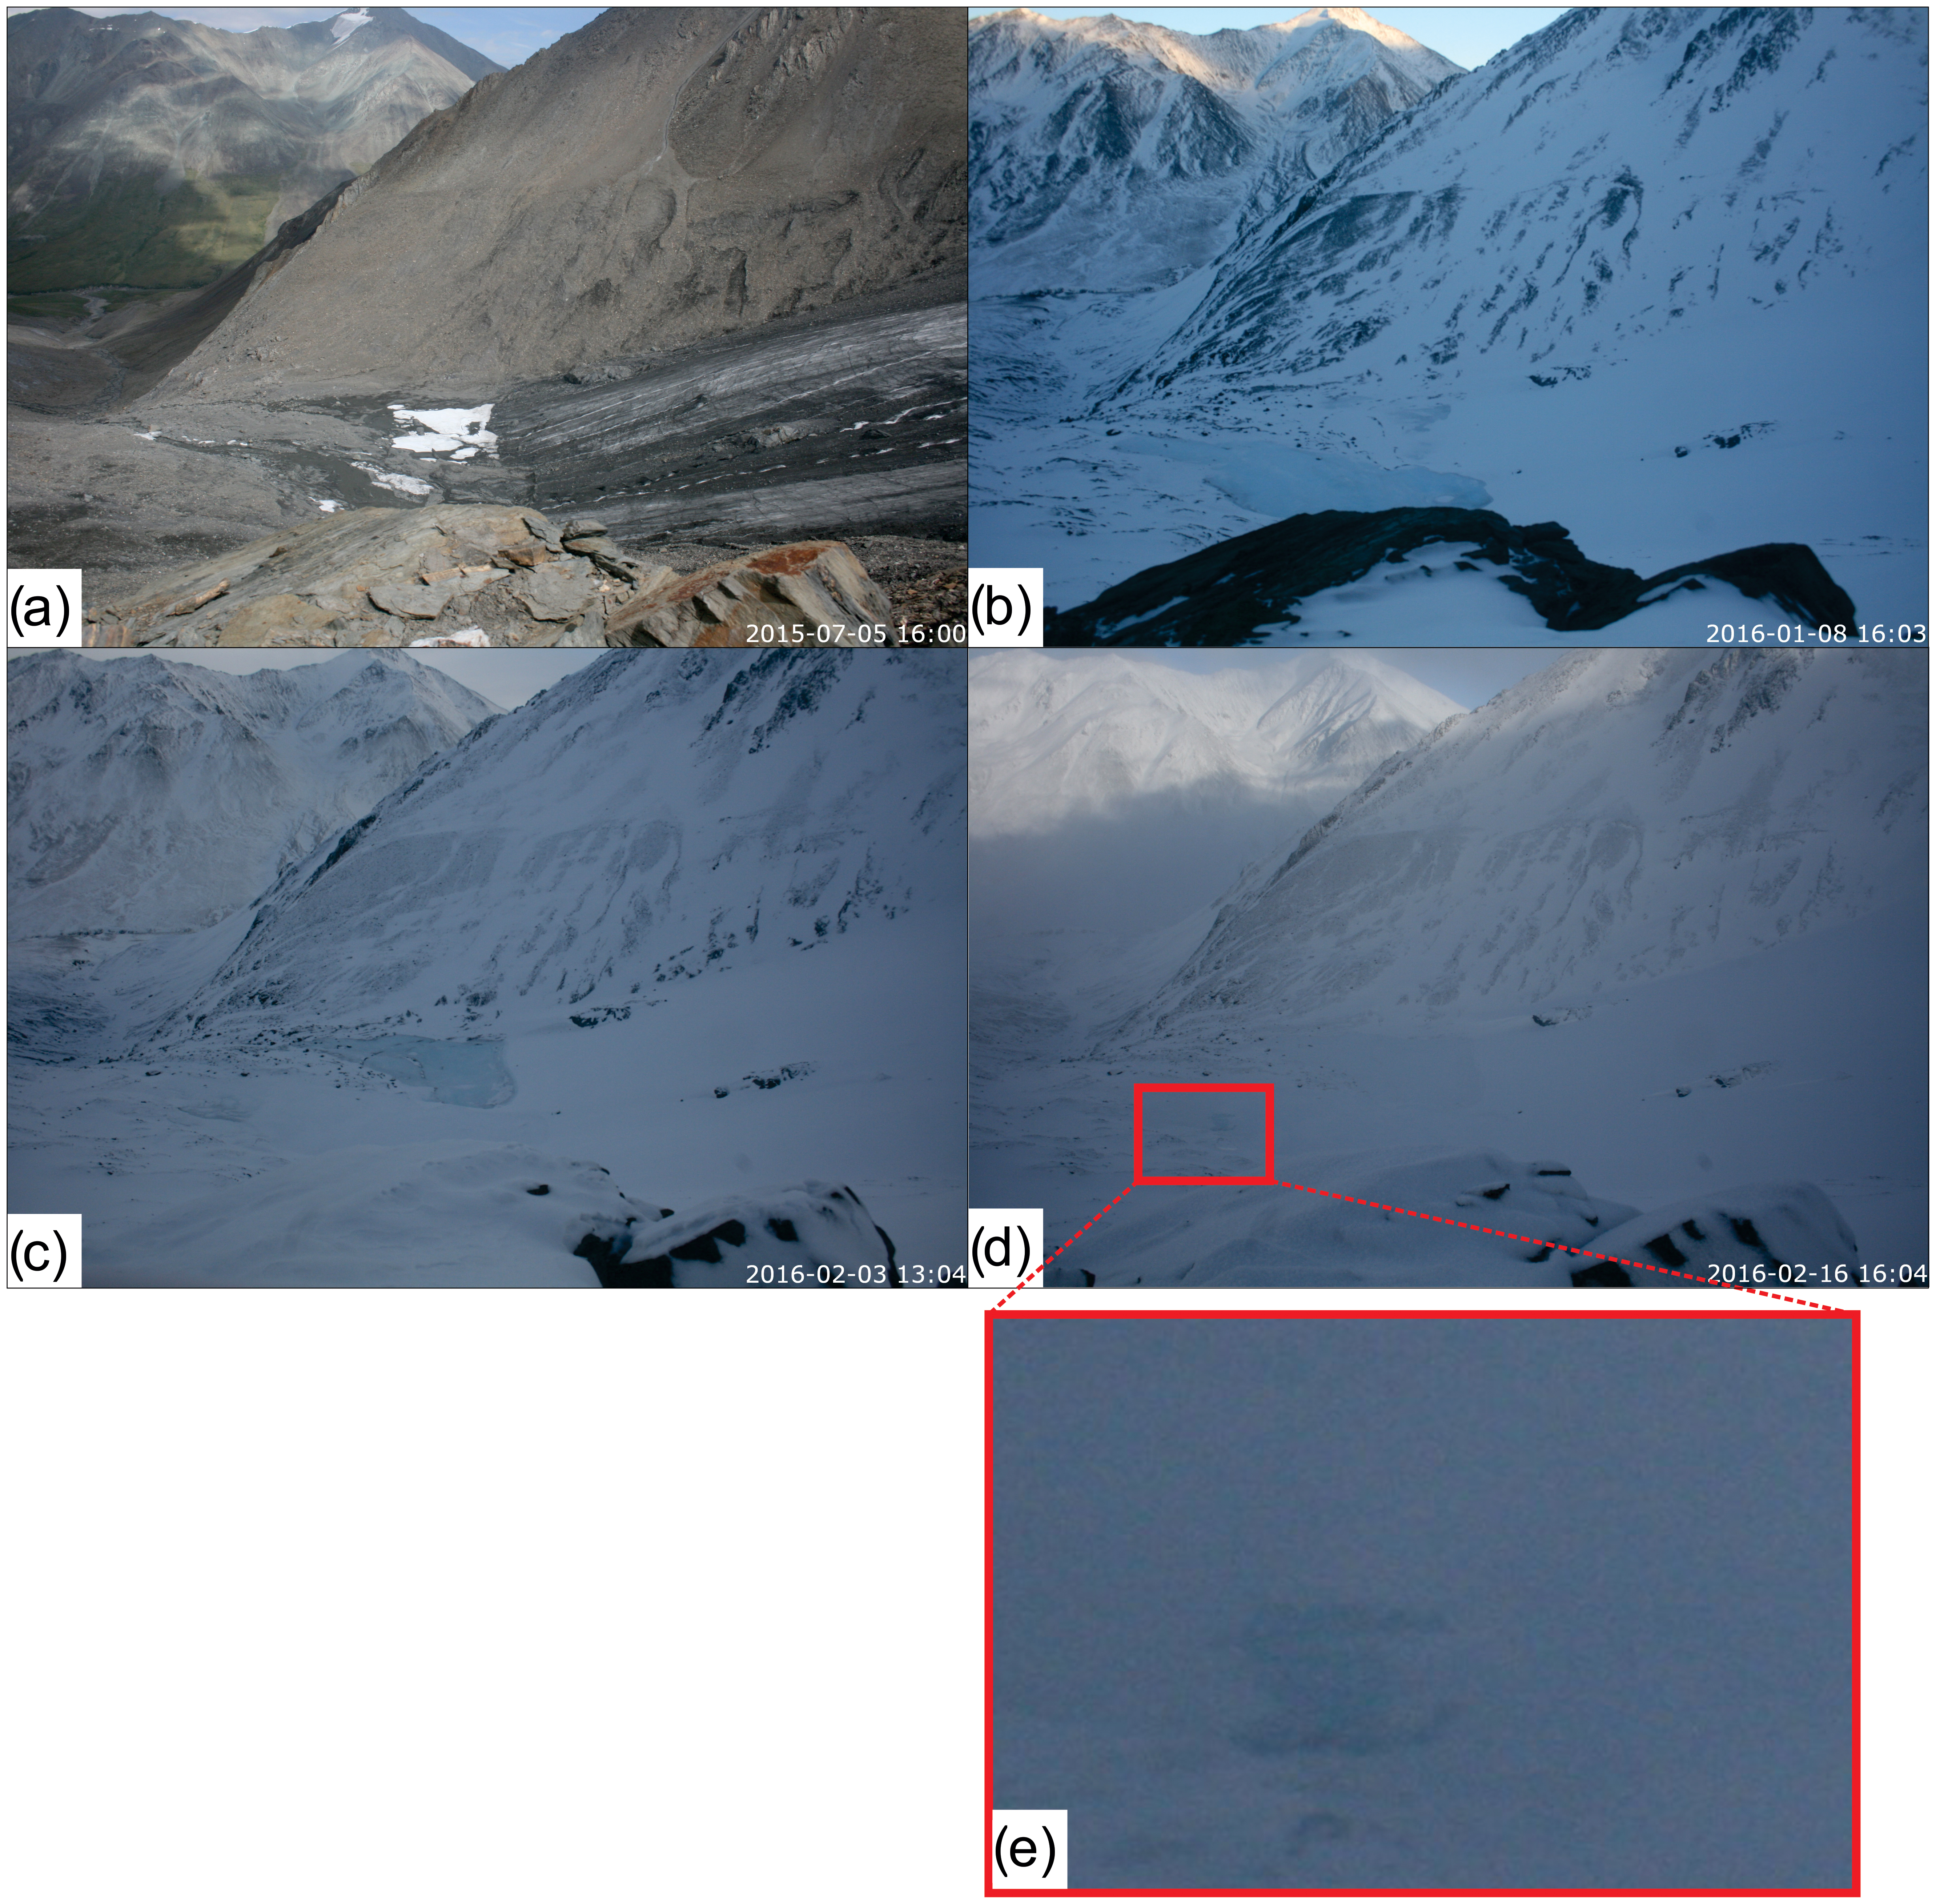 Icing mounds as a factor of formation of river and underground runoff in  eastern Siberia